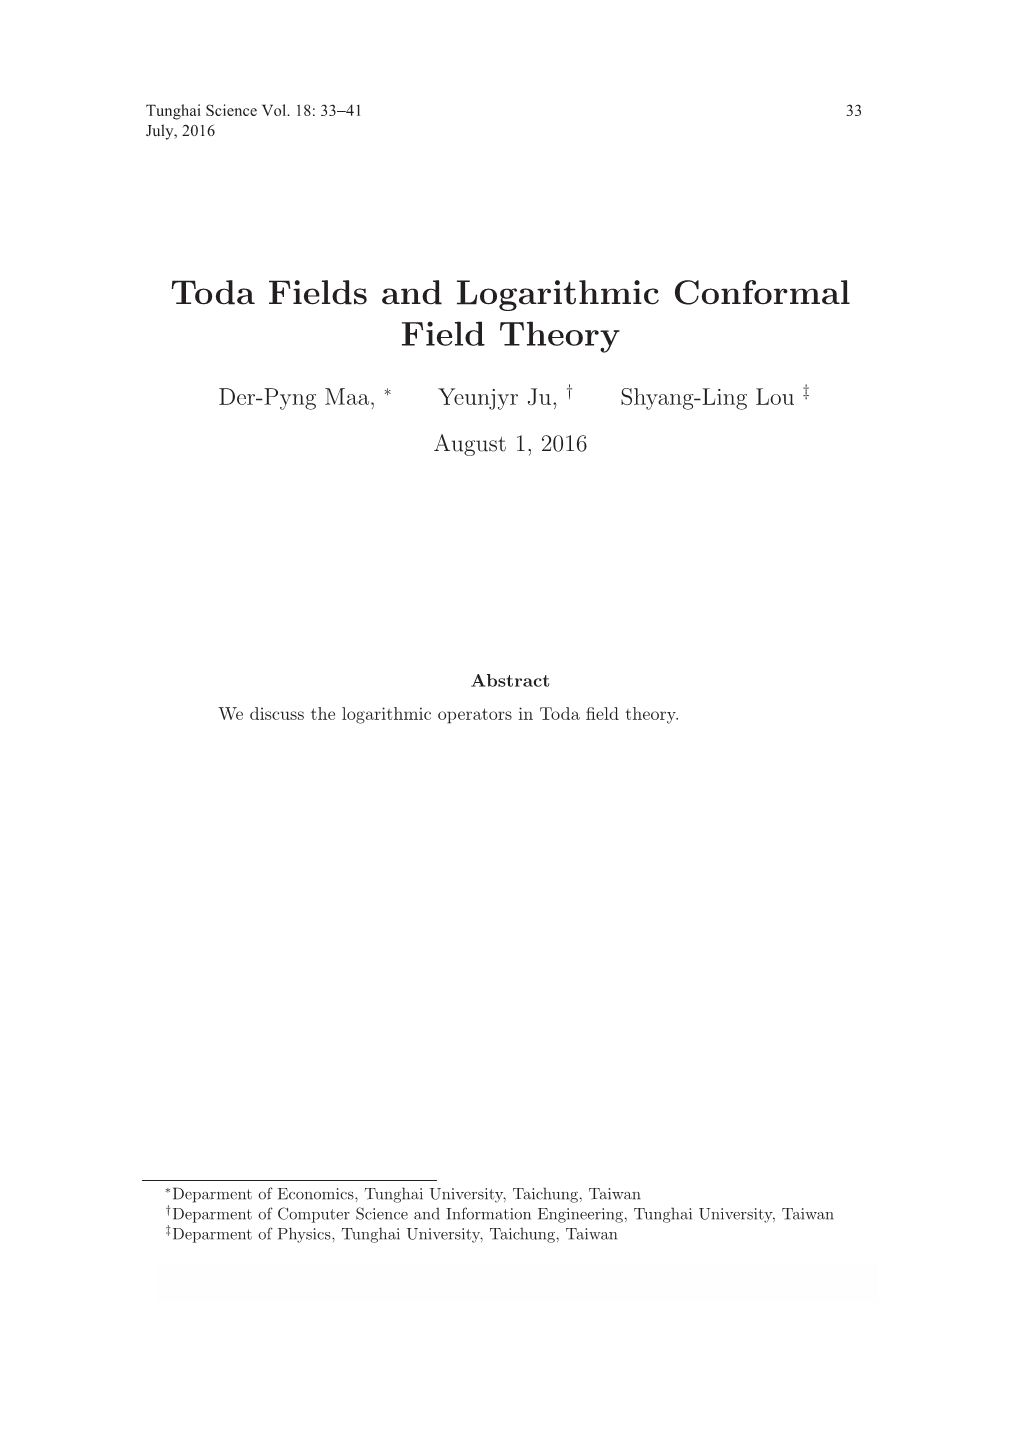 Toda Fields and Logarithmic Conformal Field Theory